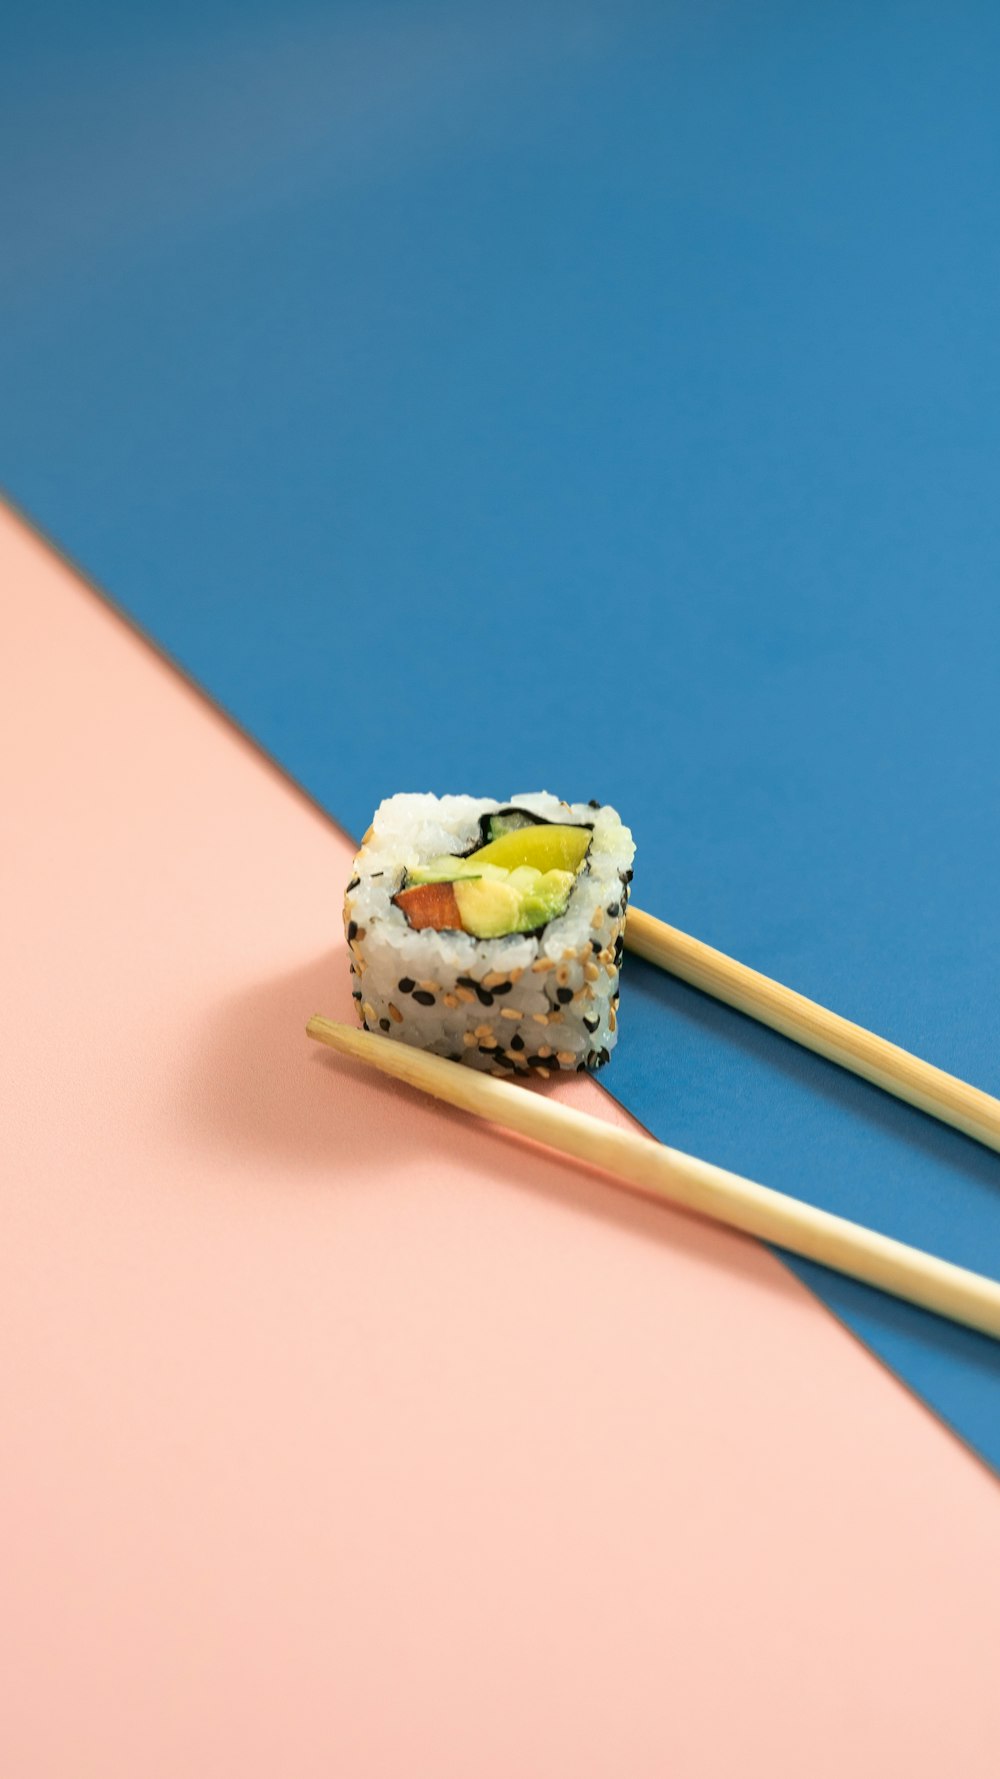 two chopsticks with sushi on them on a blue and pink background